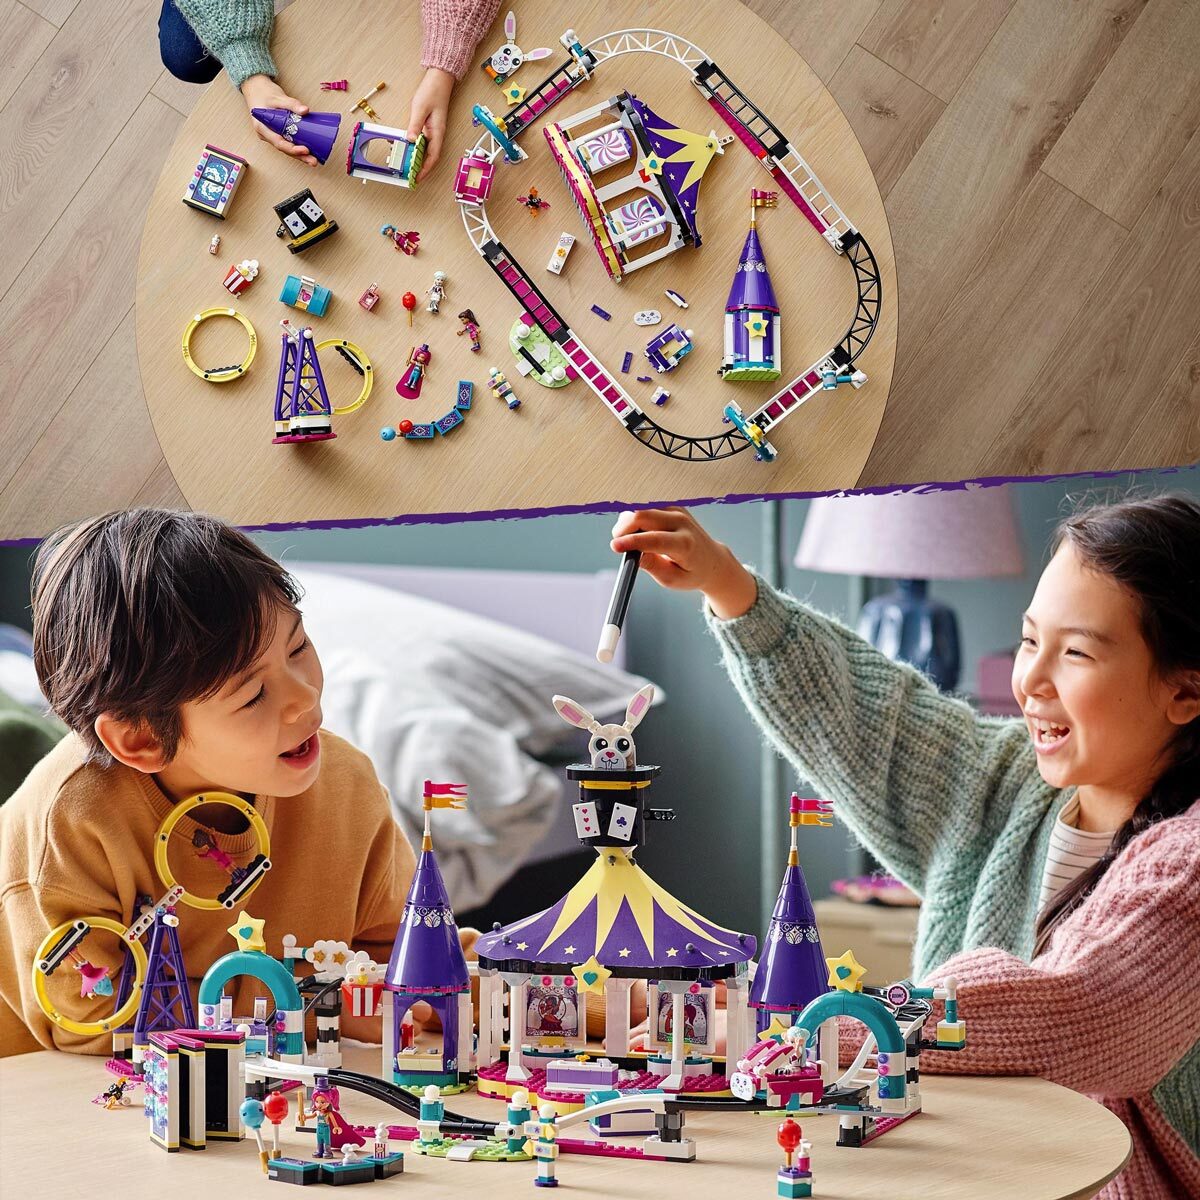 Buy LEGO Friends Magical Funfair Roller Coaster Lifestyle Image at costco.co.uk